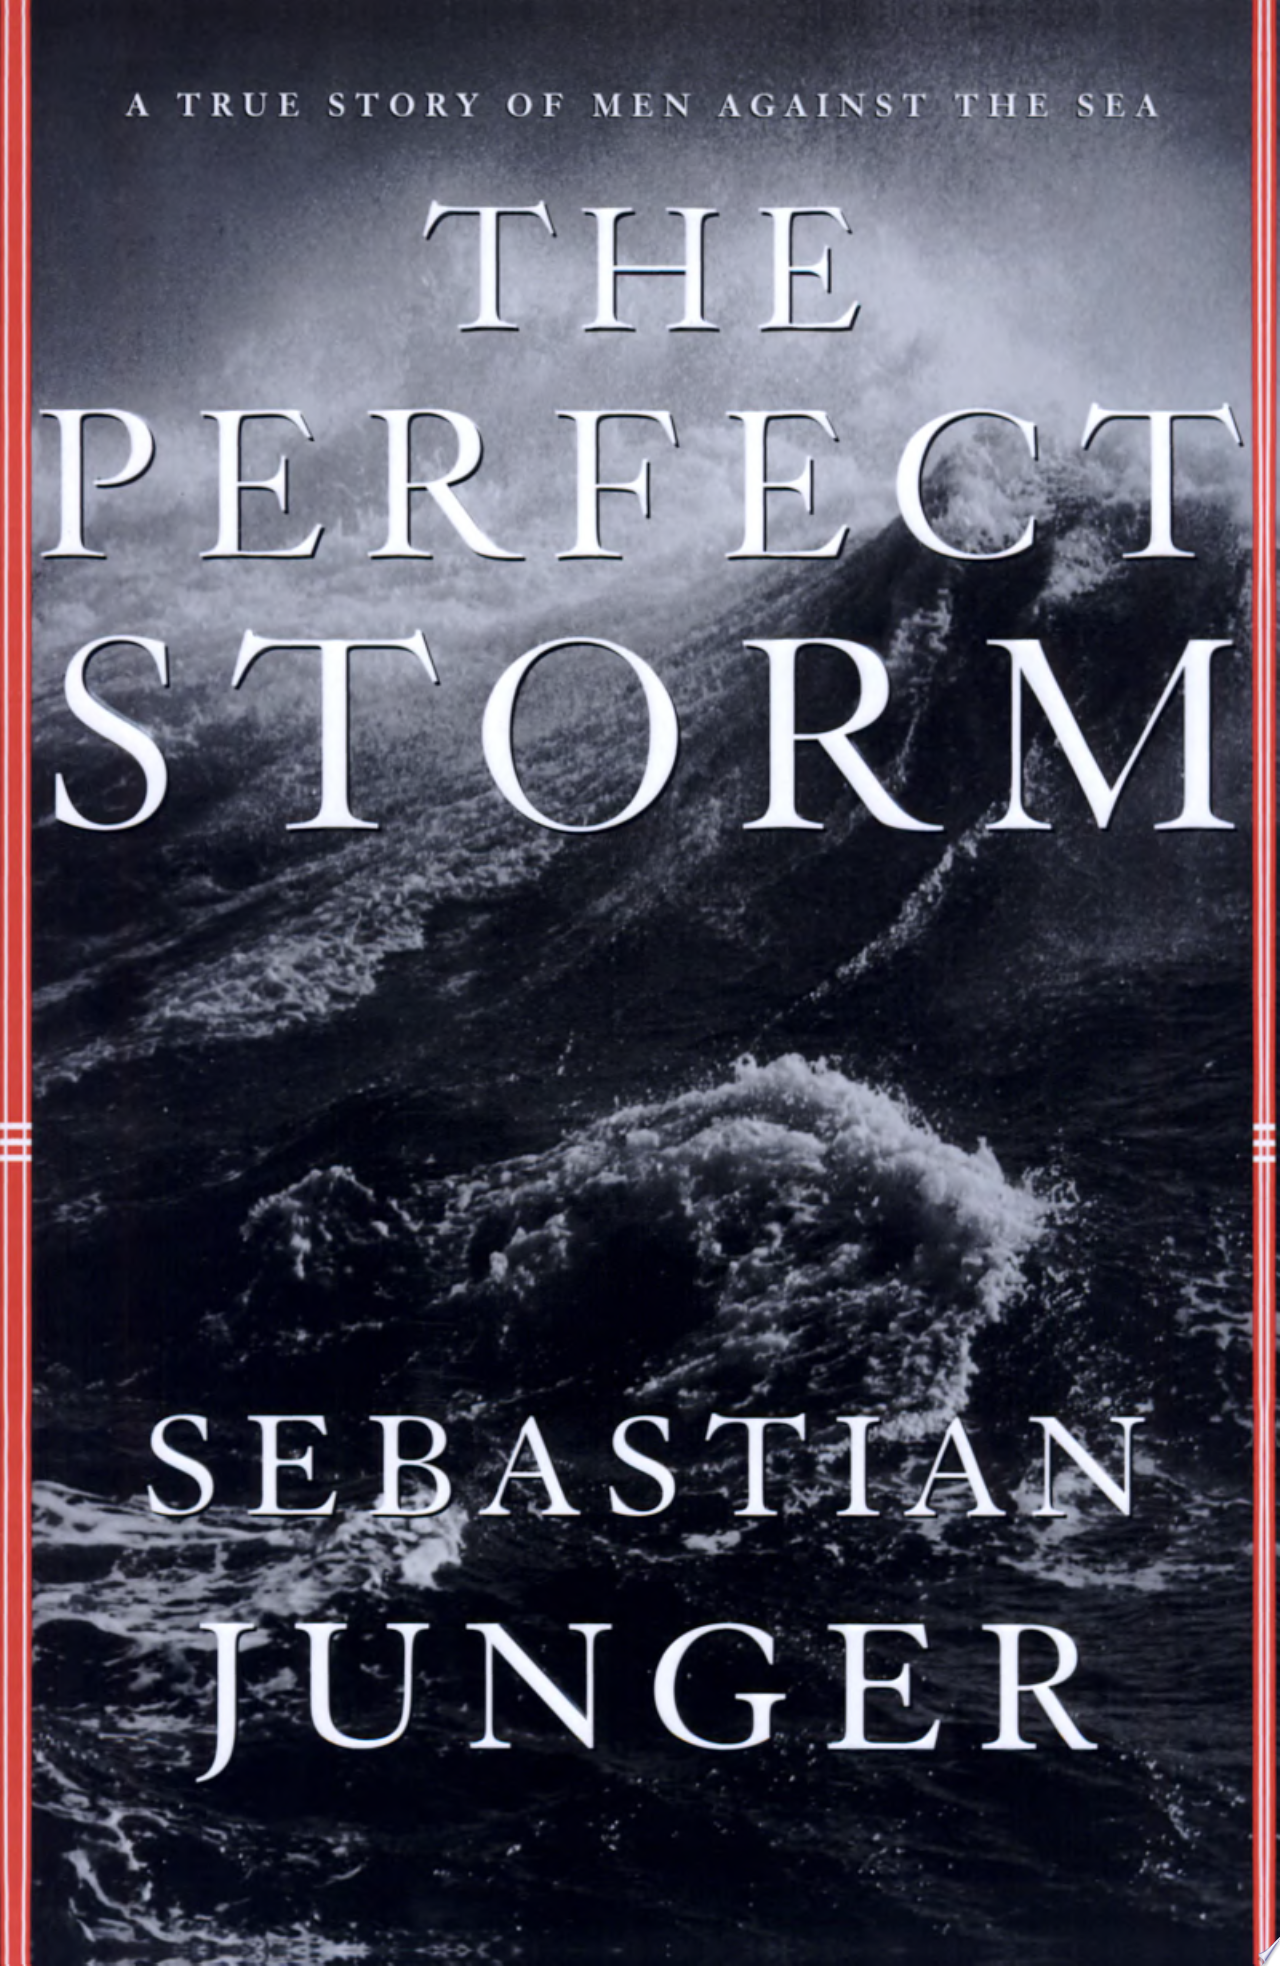 Image for "The Perfect Storm"